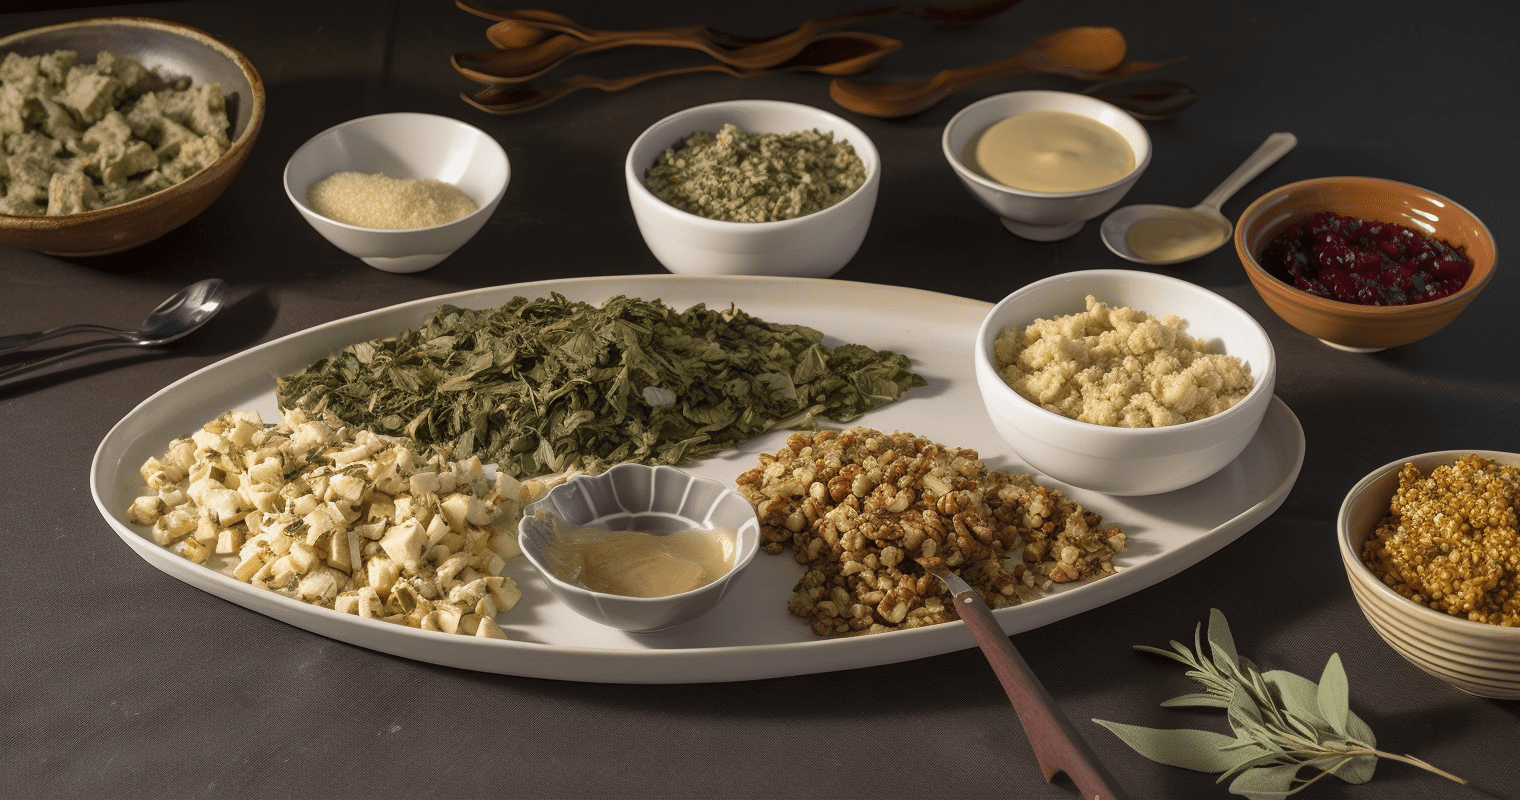 Sage and Onion Stuffing Ingredients